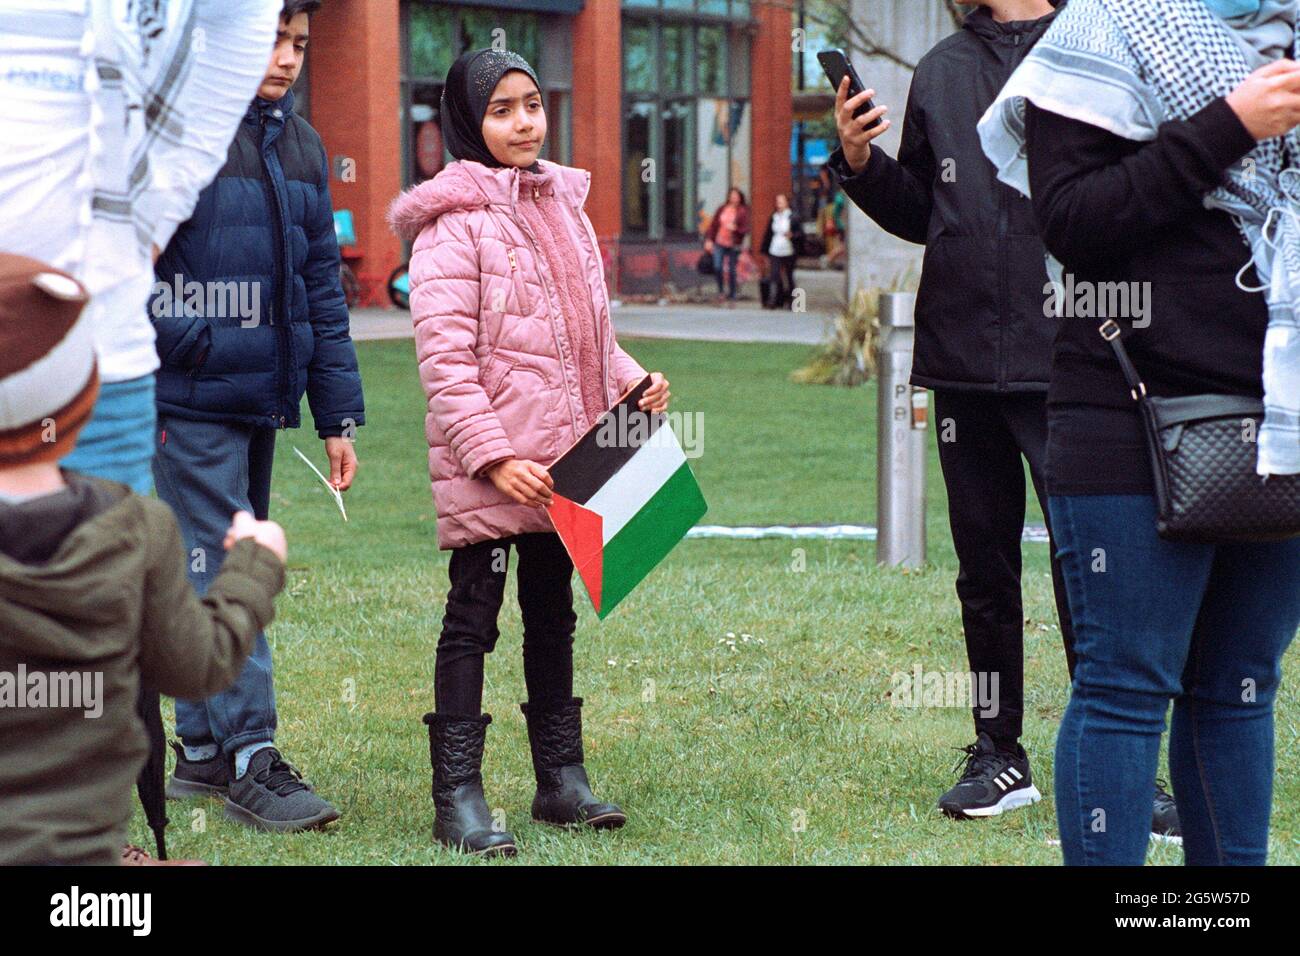 Manchester, UK - 22 May 2021: People at Piccadilly Gardens to protest the action on Gaza. Stock Photo